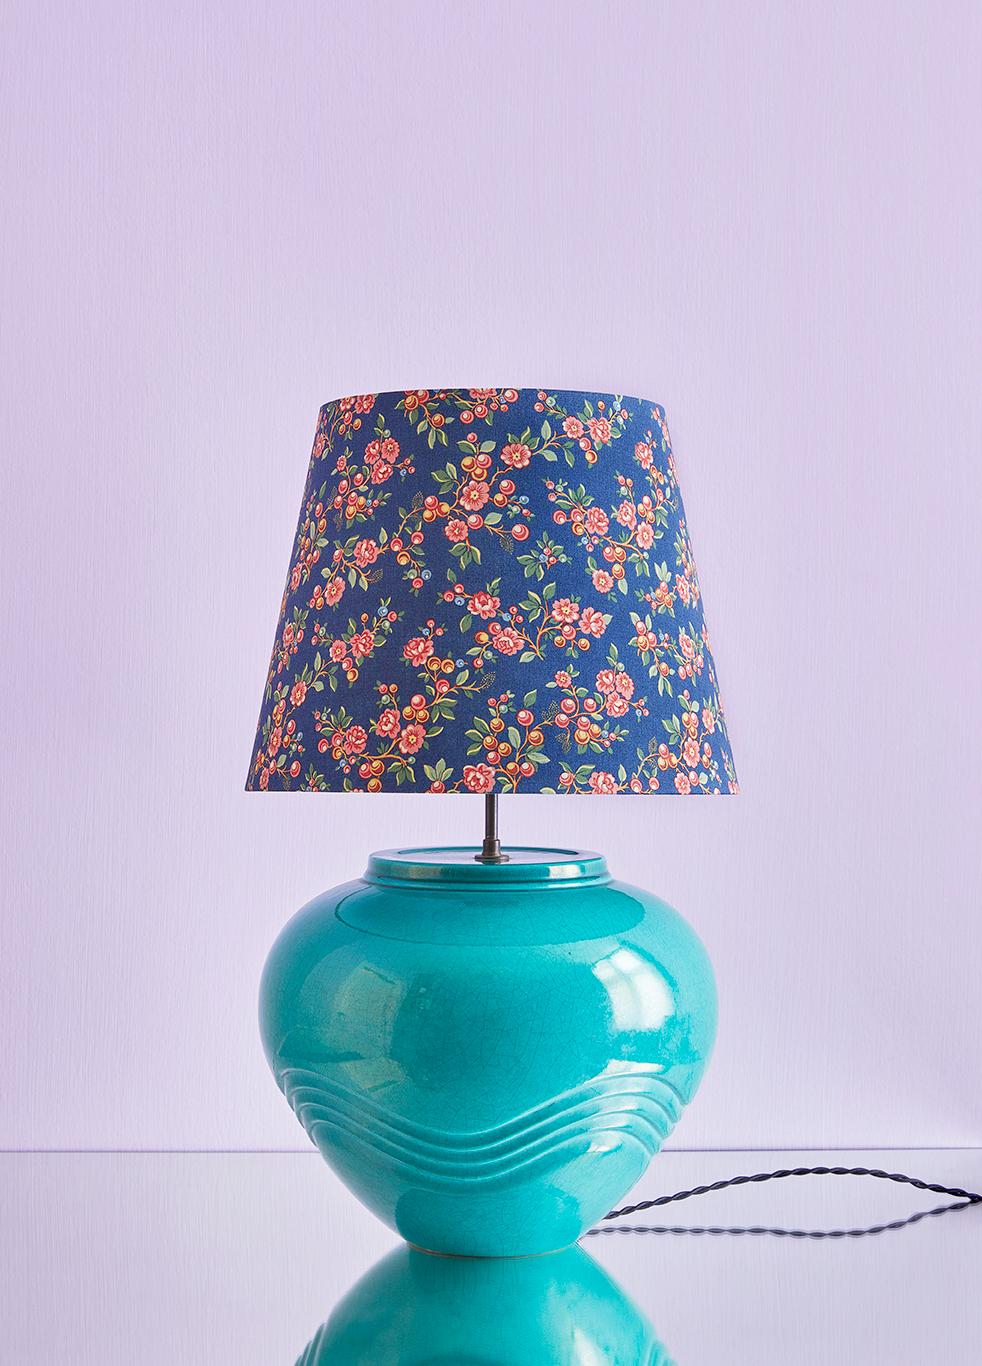 France, 1980

Ceramic table lampe in turquoise glaze with customized shade

Measures: H 58 x Ø 36 cm.
 